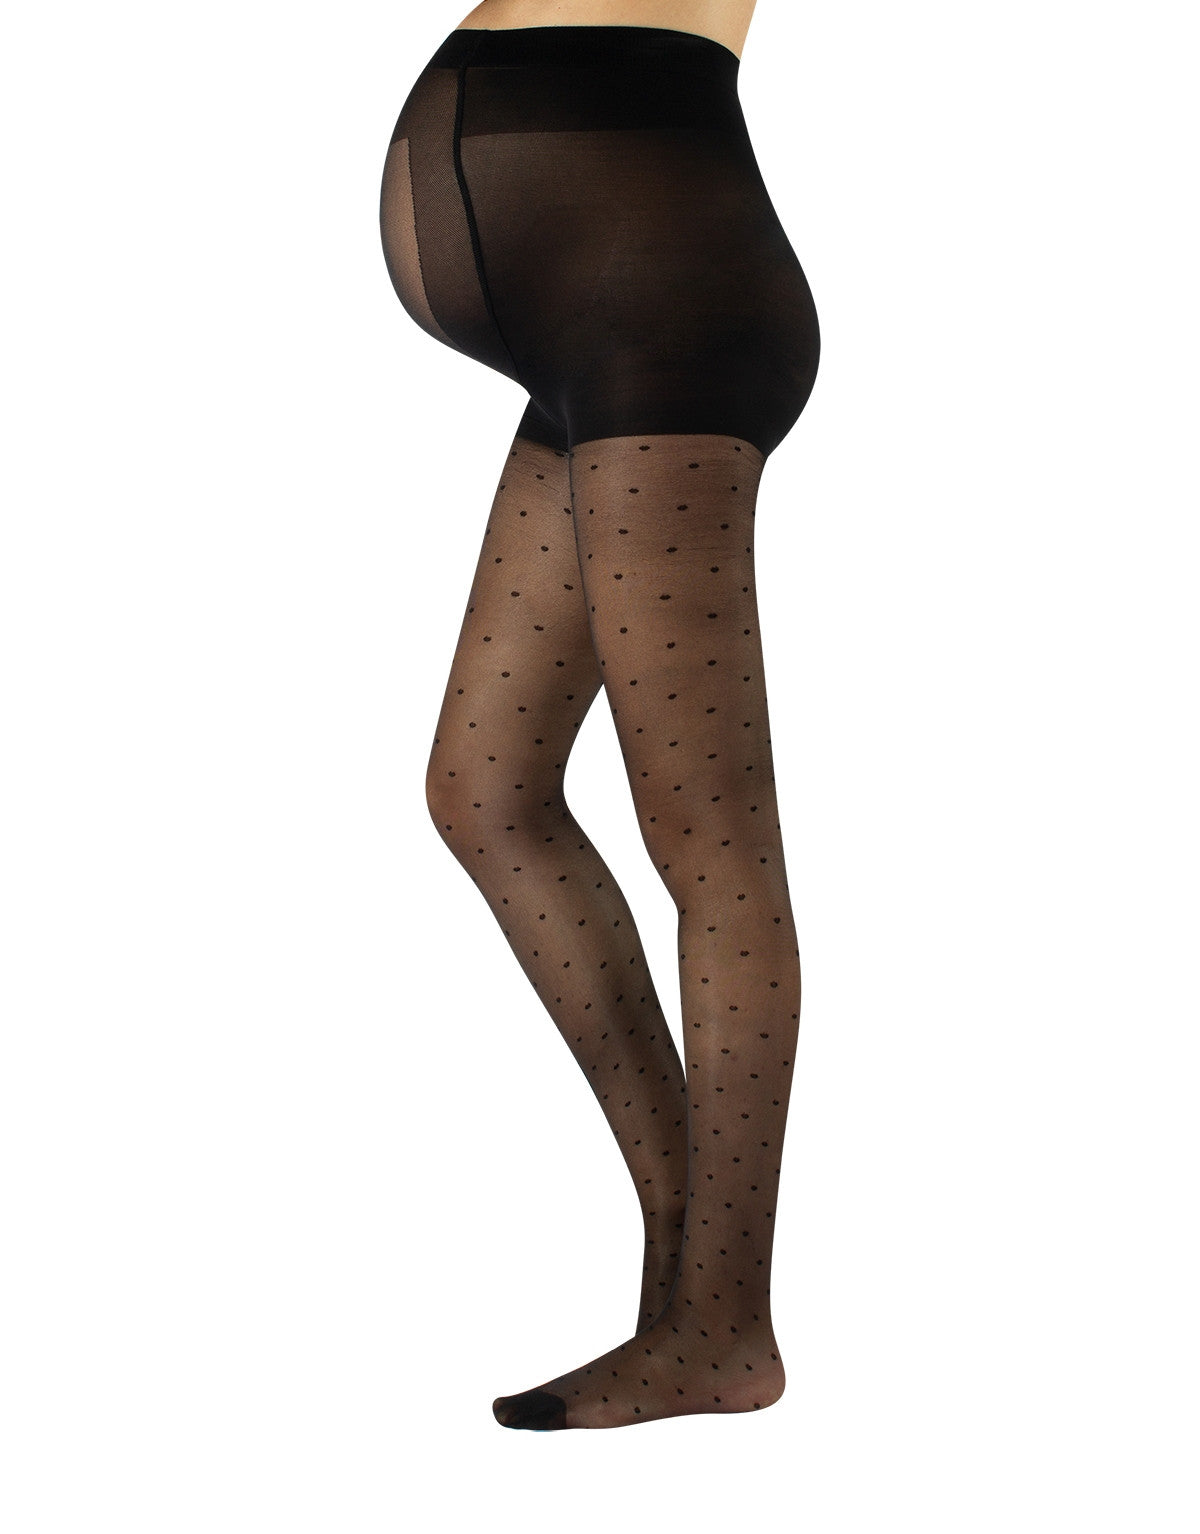 Calzitaly Maternity Spot Tights - Sheer black maternity tights with a light polka dot pattern and long opaque panelled top to snugly fit over bump flat seams, cotton gusset and reinforced toe.